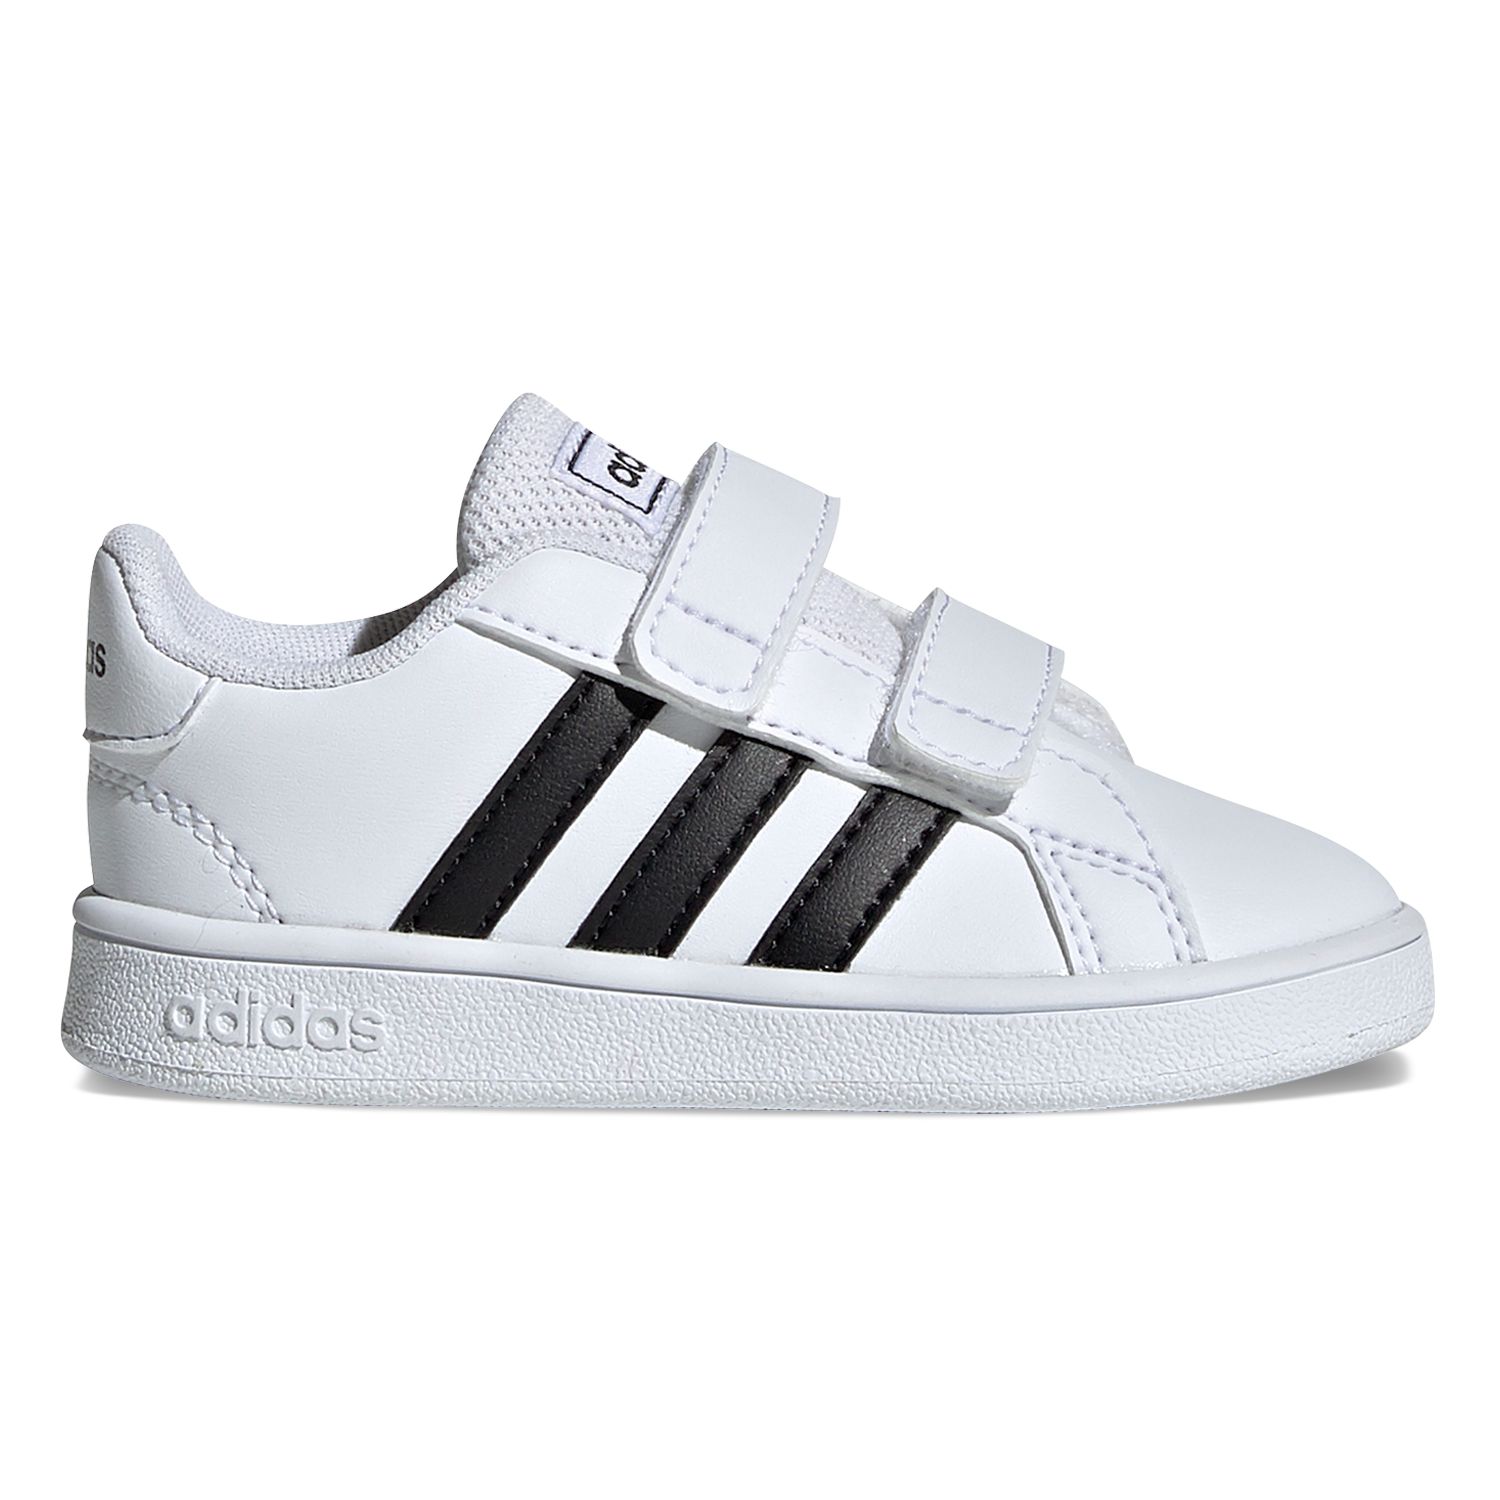 adidas Grand Court Toddler Kids' Sneakers